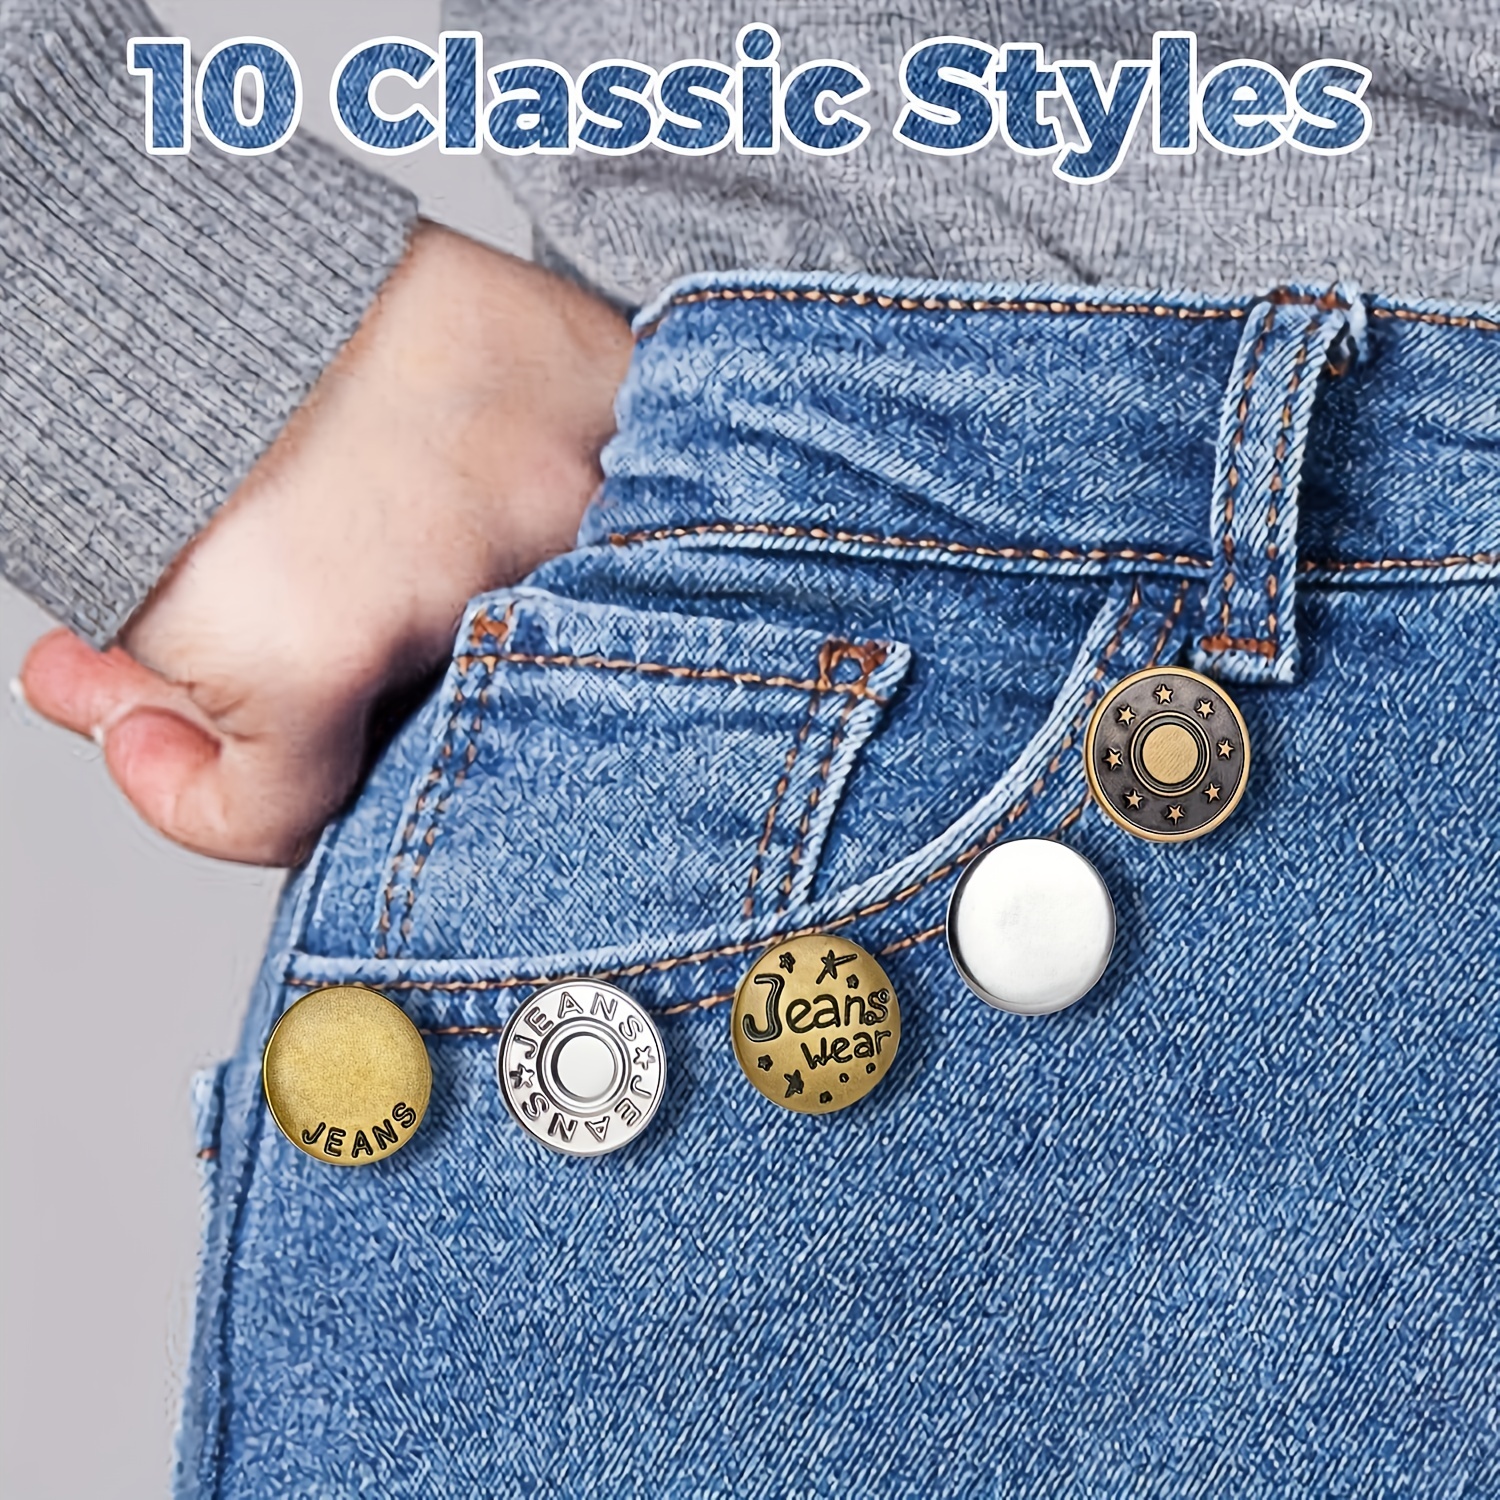 Easyfit Retractable Jeans Button No More Hassle With Loose - Temu